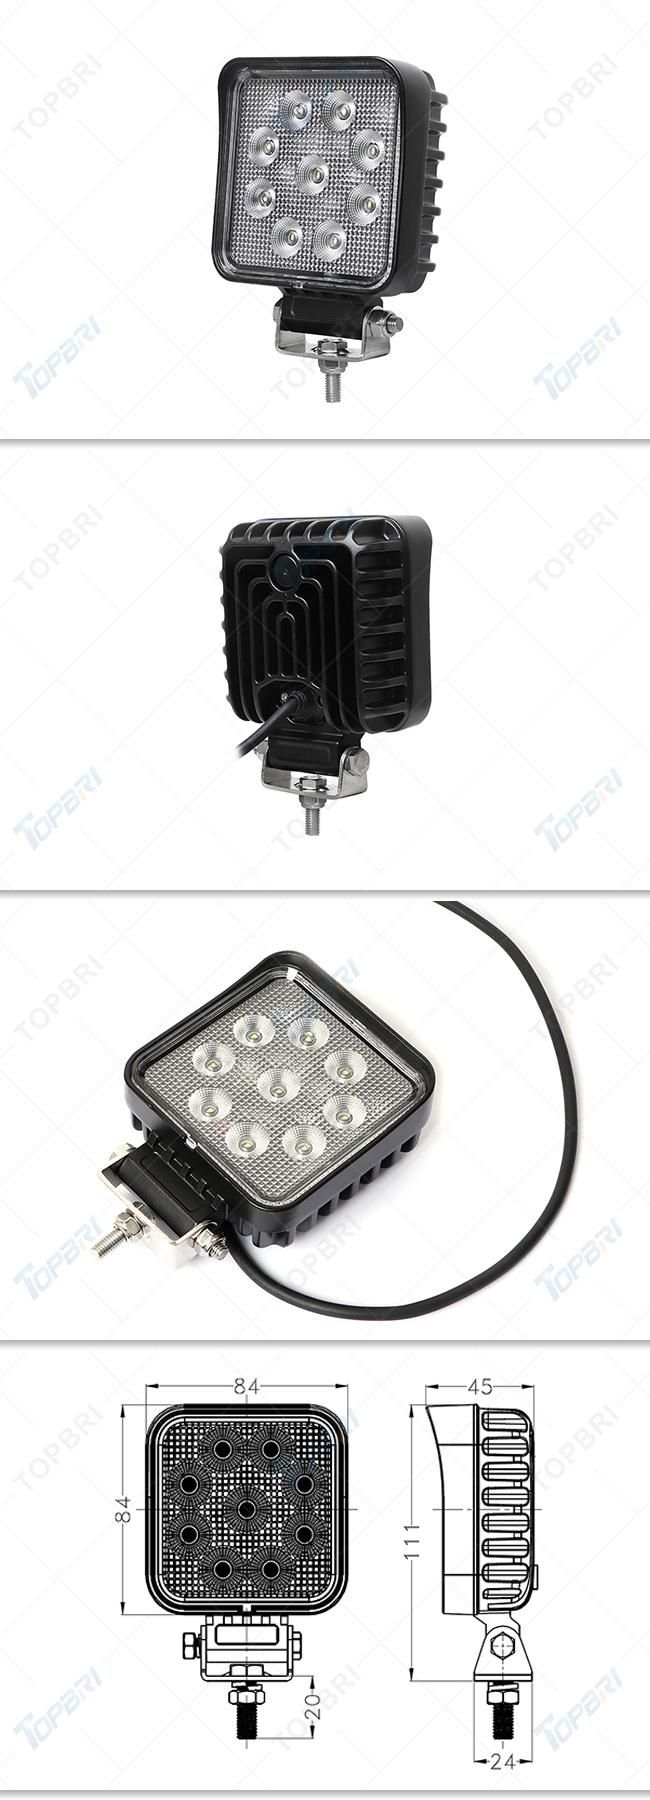 27W Auto Car Motorcycle Light 3.3inch Mini LED Work Driving Light for Offroad Truck